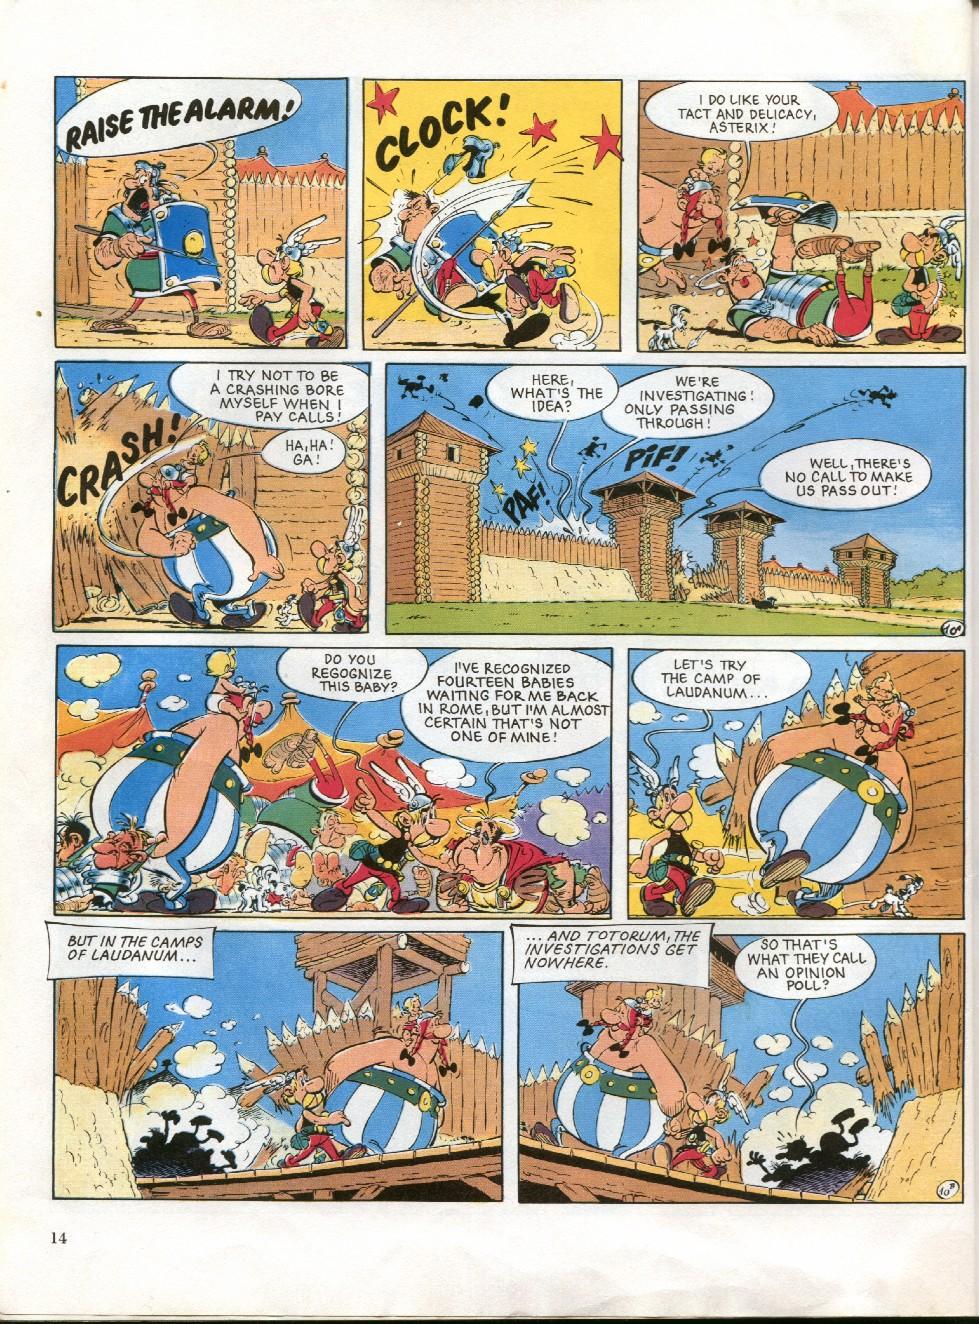 27 Asterix And Son | Read 27 Asterix And Son comic online in high ...